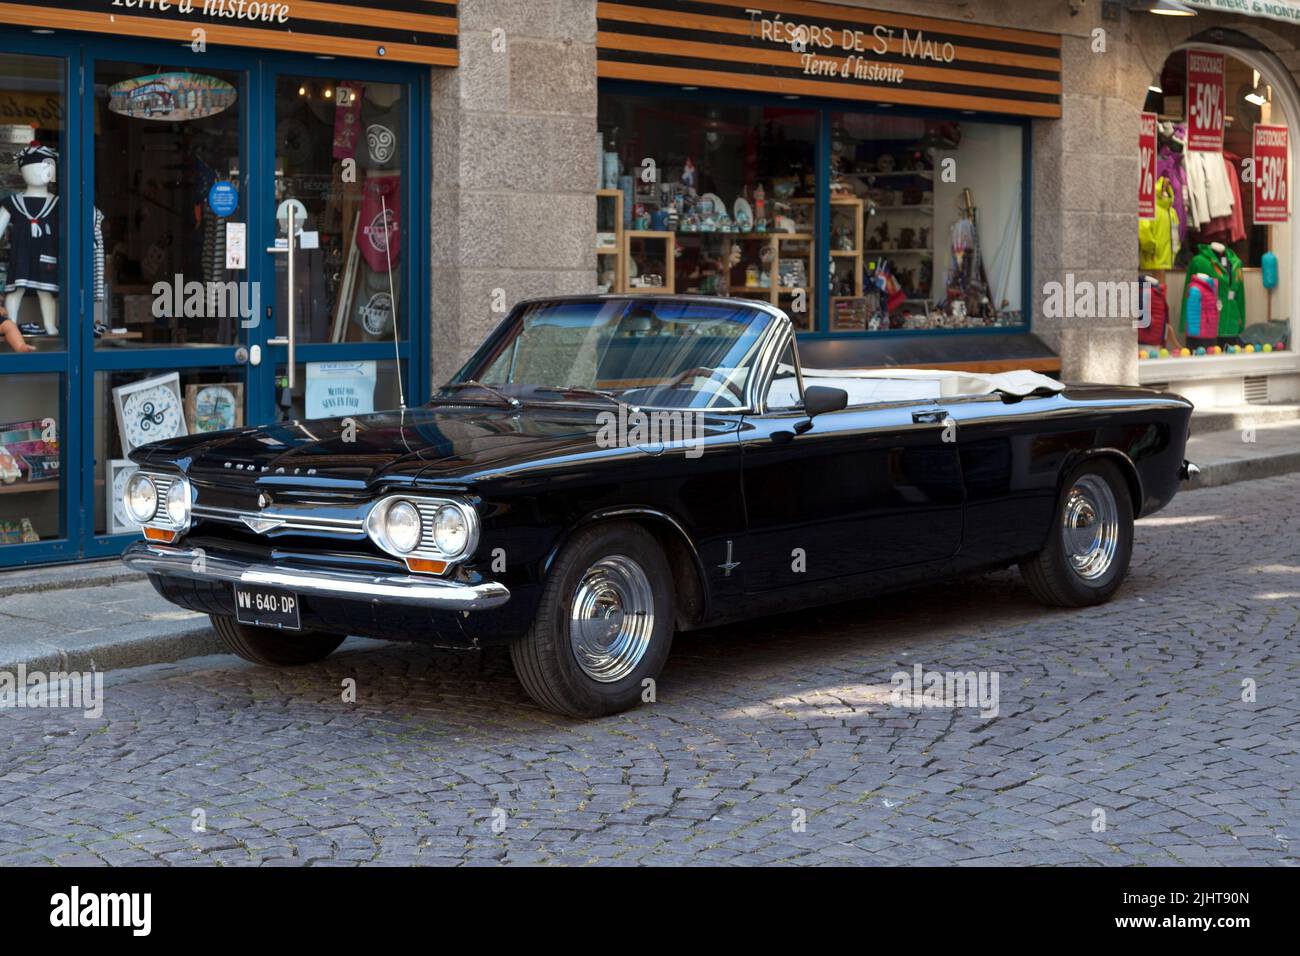 Saint-Malo, France - June 02 2020: 1964 Chevrolet Corvair Monza Convertible parked in the street. Stock Photo